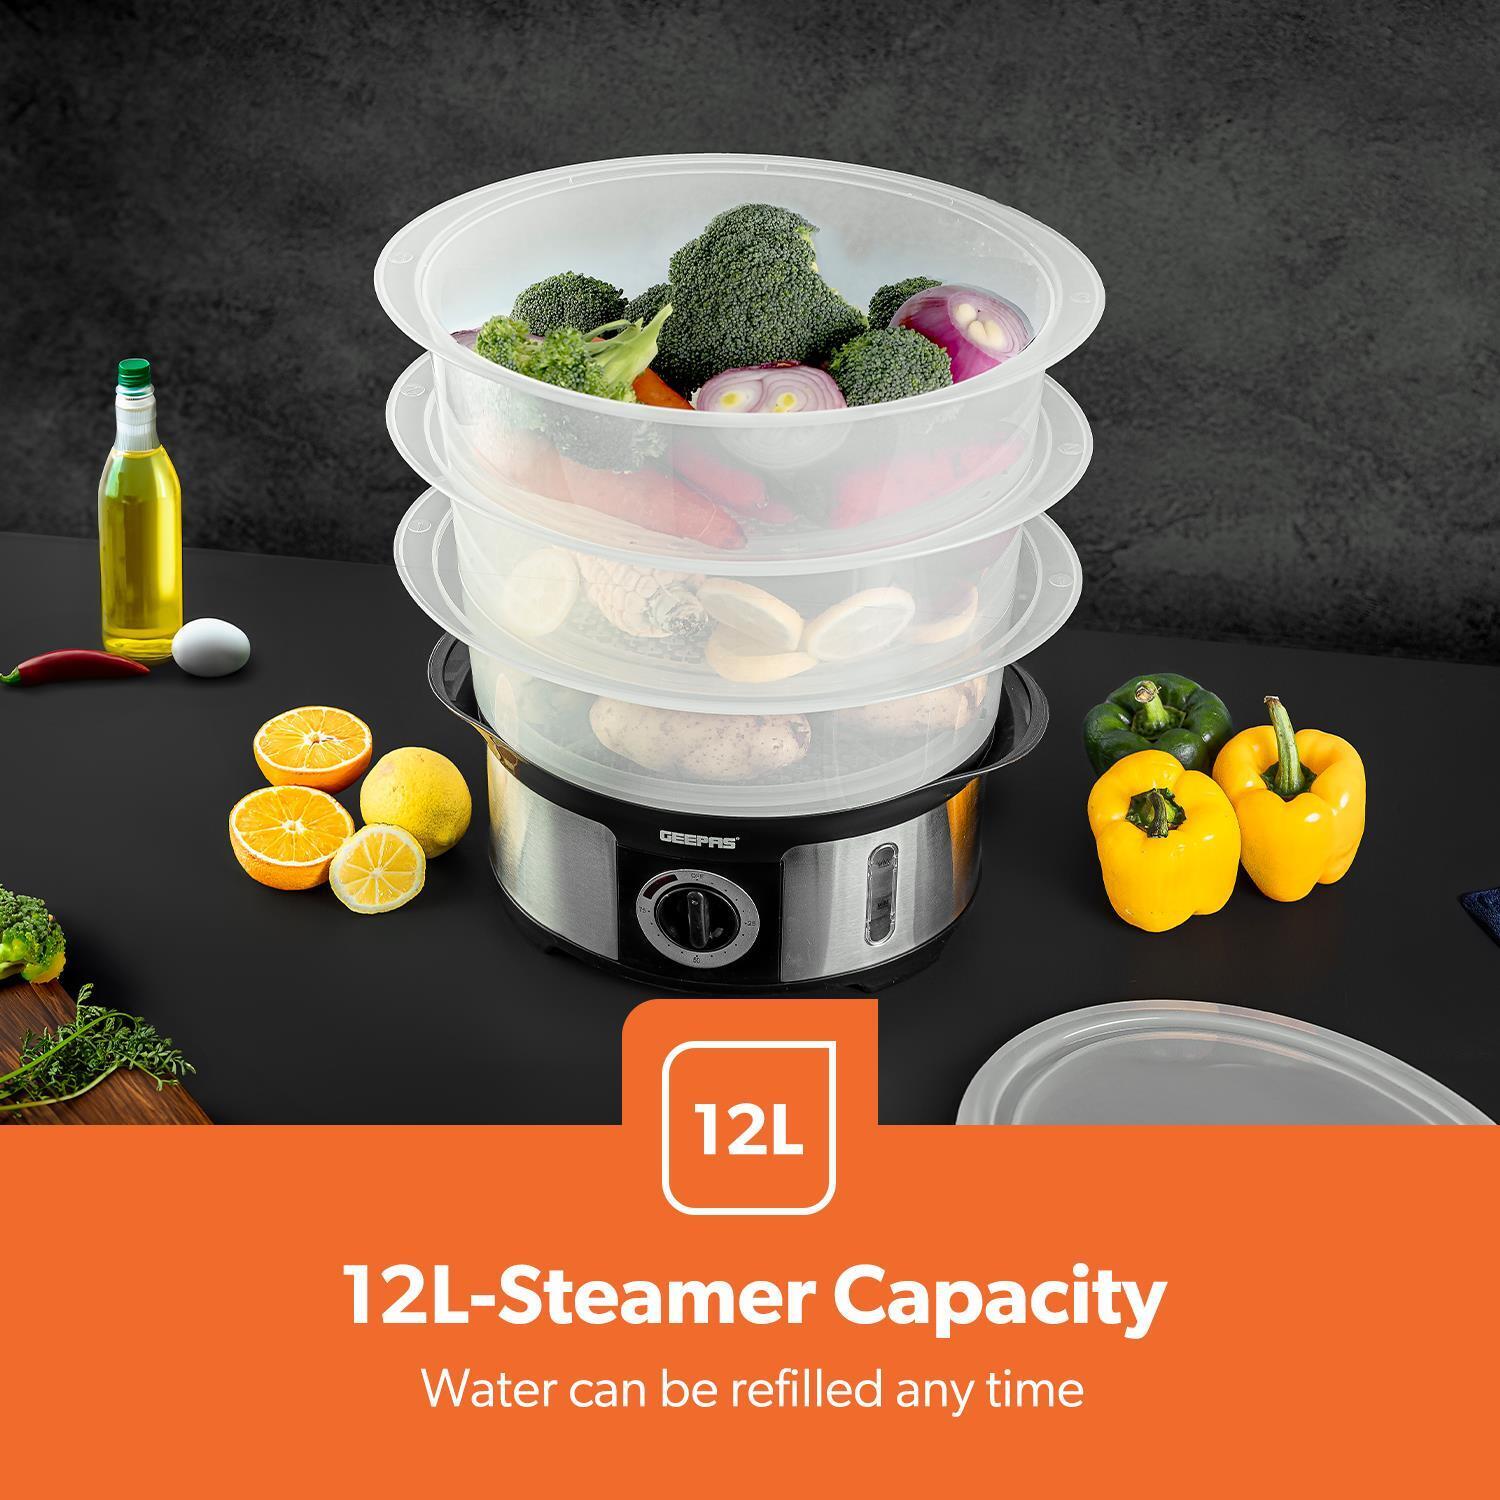 3-Tier Electric Stainless Steel Food Steamer and Cooker 12L